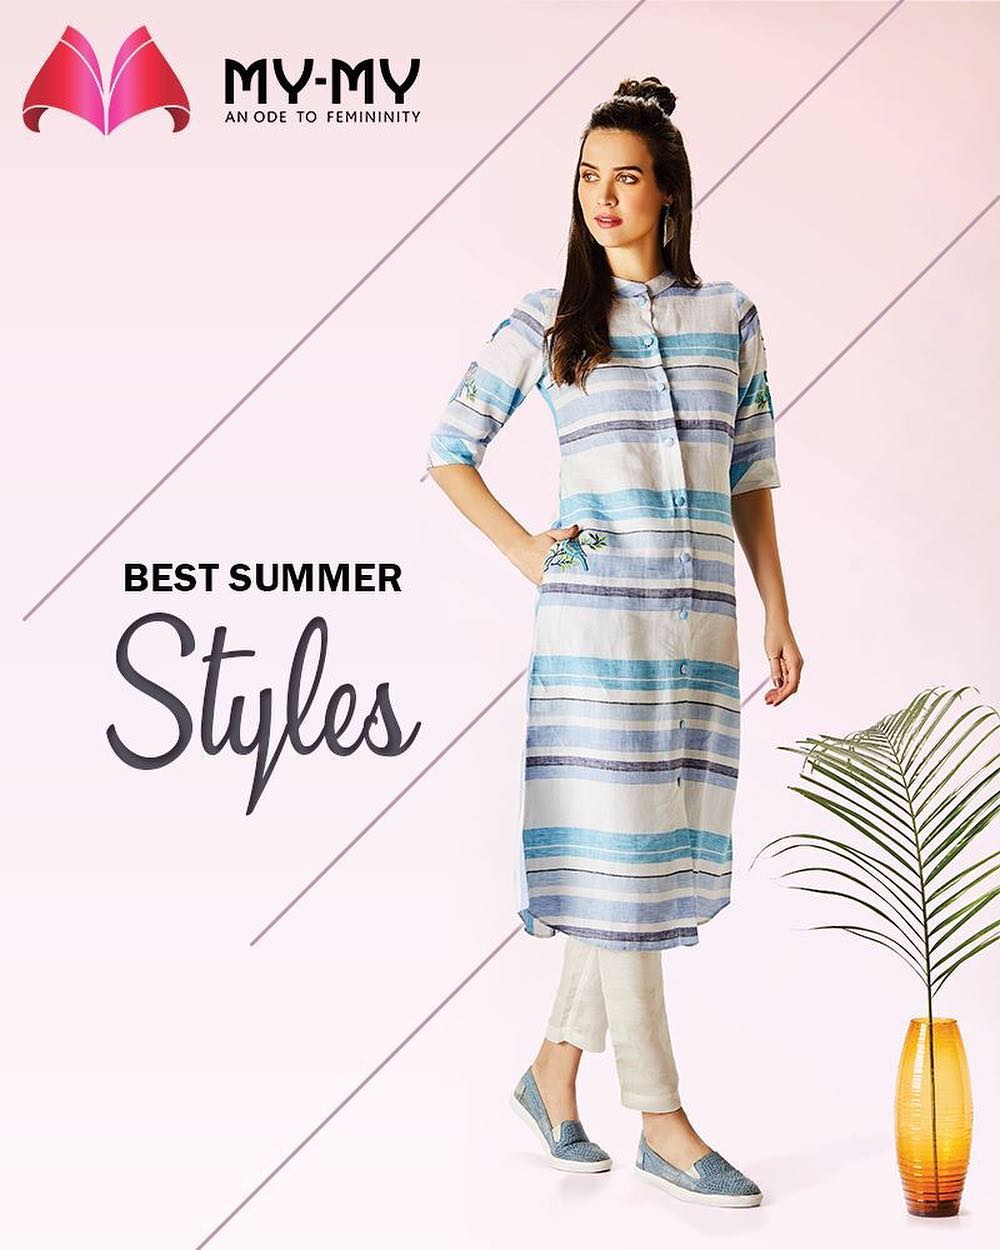 Don the best summer looks with gorgeous dresses! 
#SummerWardrobe #MyMy #MyMyAhmedabad #Fashion #Ahmedabad